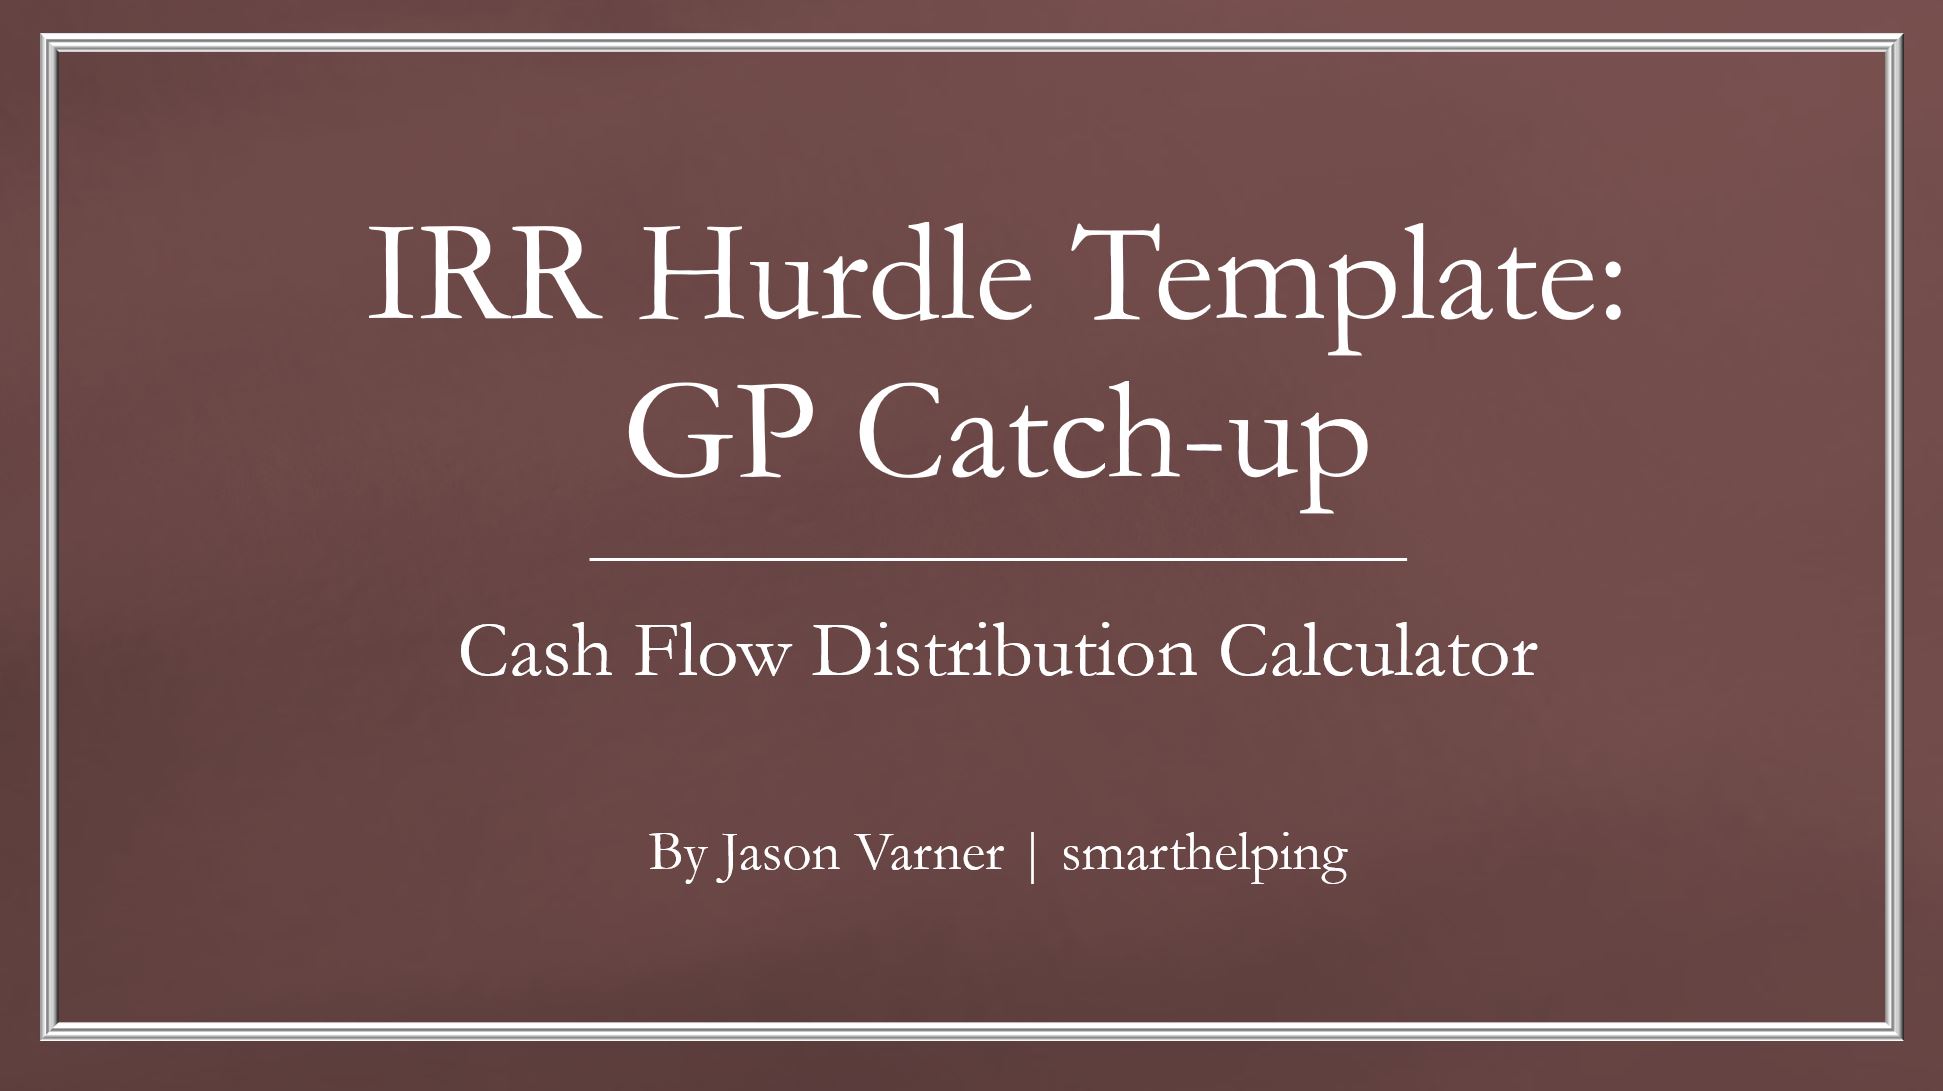 Joint Venture Waterfall: GP Catch-up Option